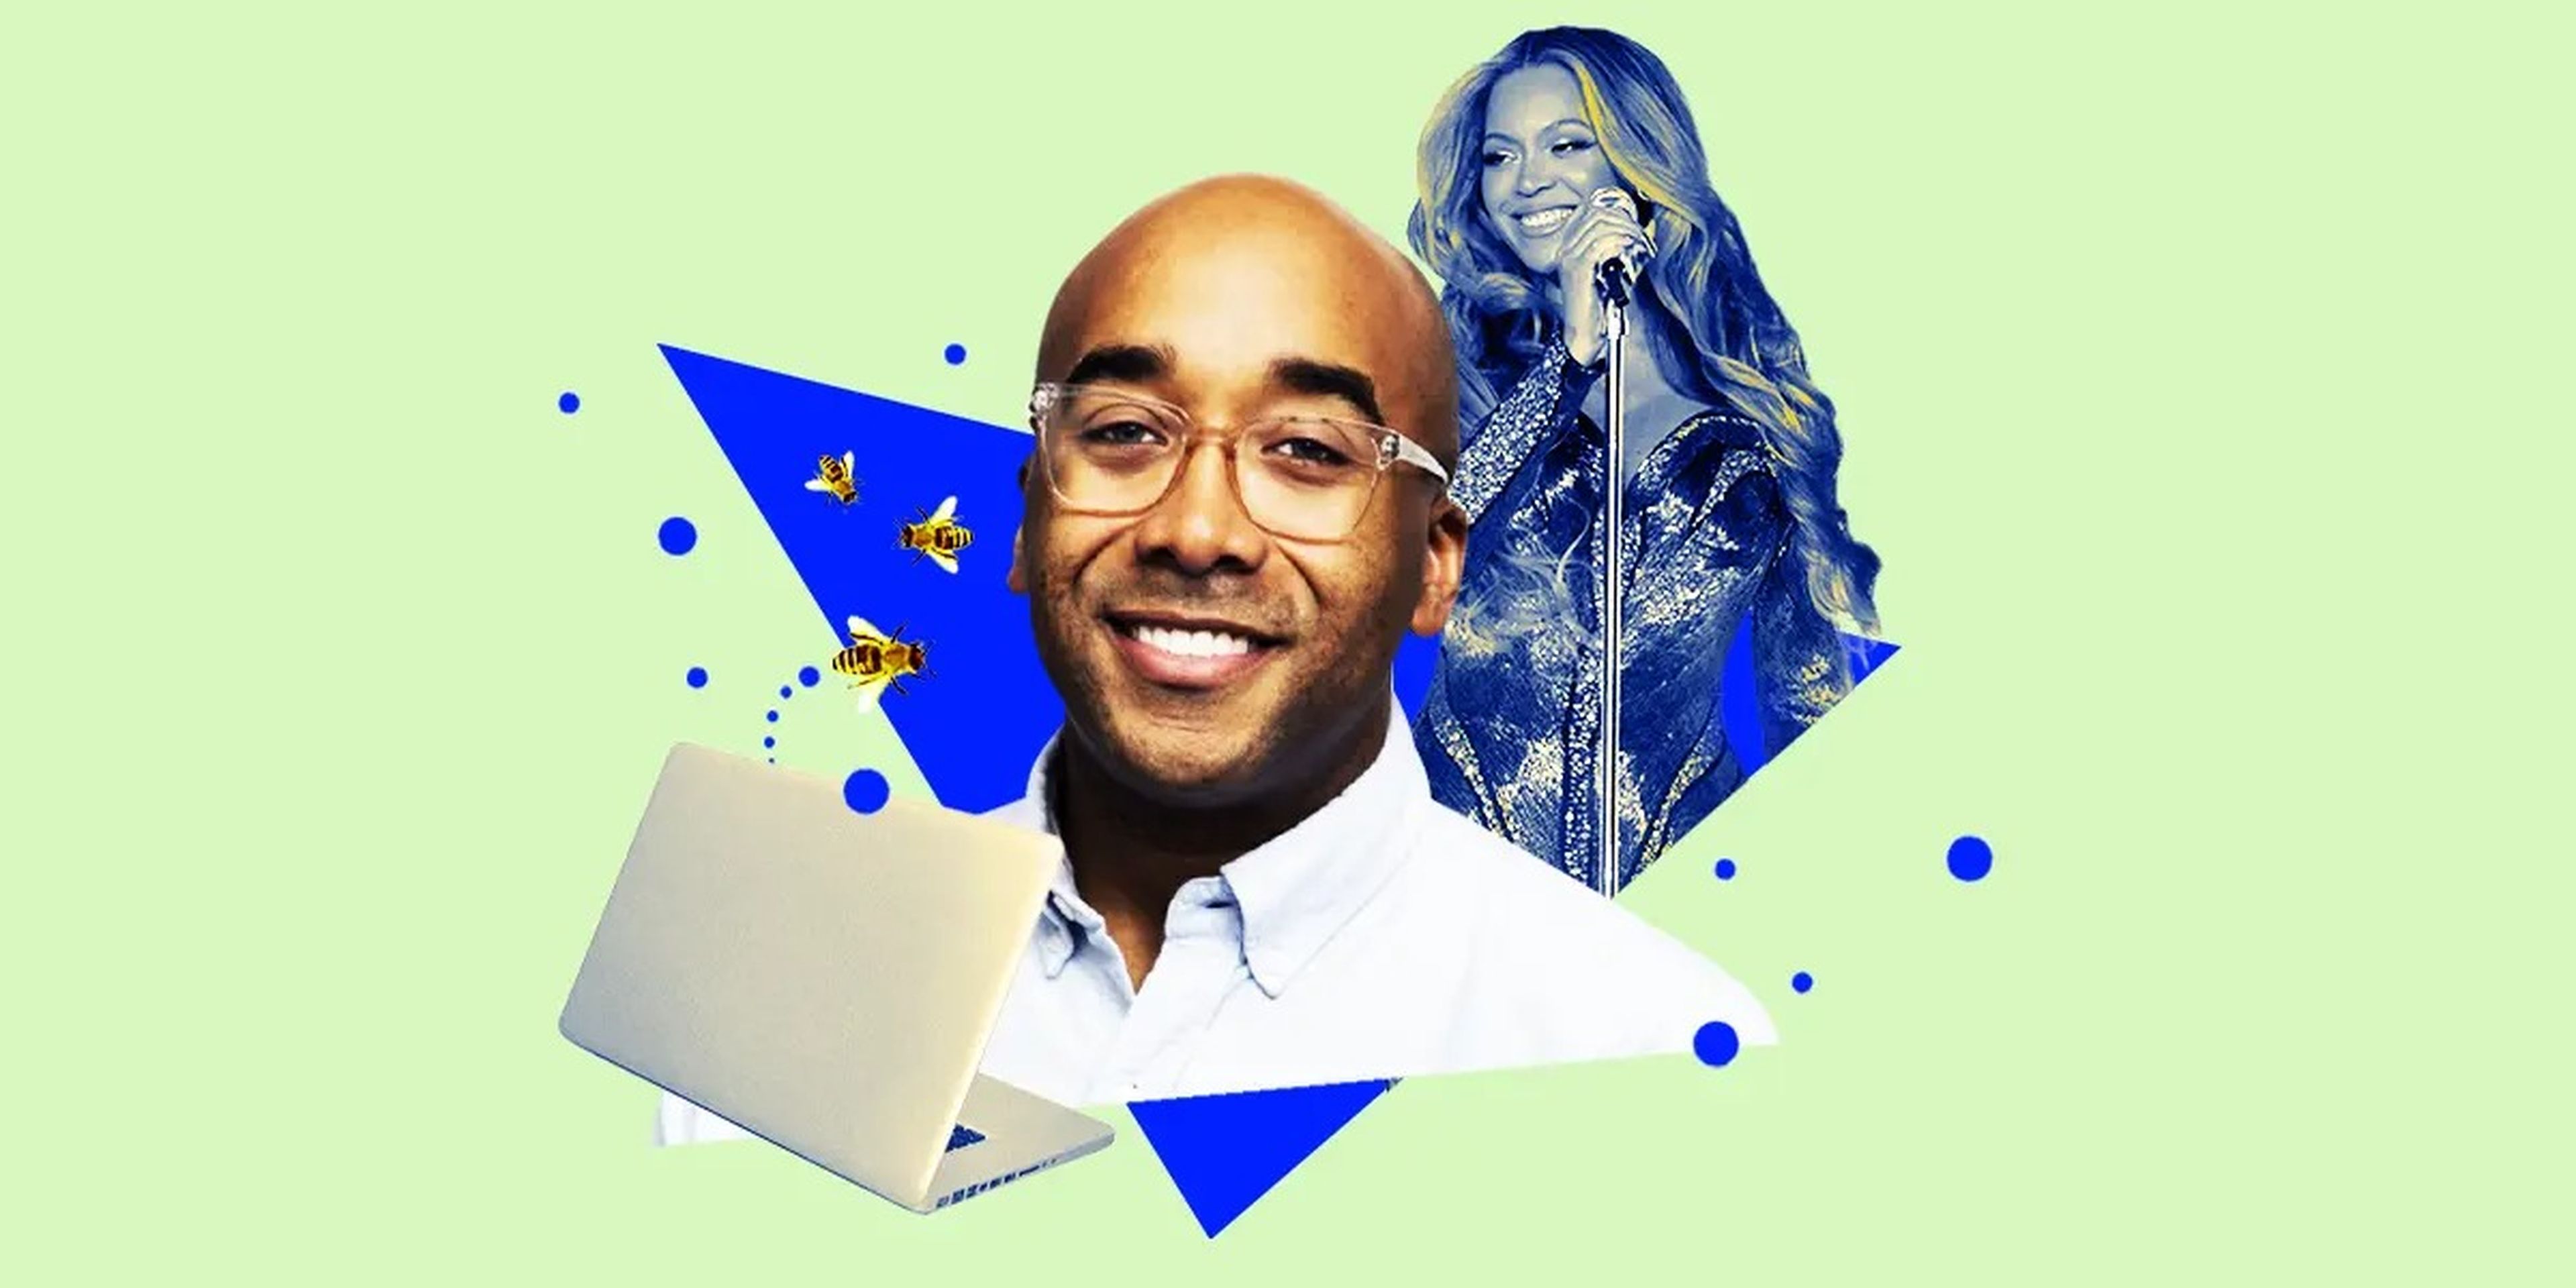 Photo collage featuring Marcus Collins, Beyoncé, a laptop, and three little bees representing the Beyhive